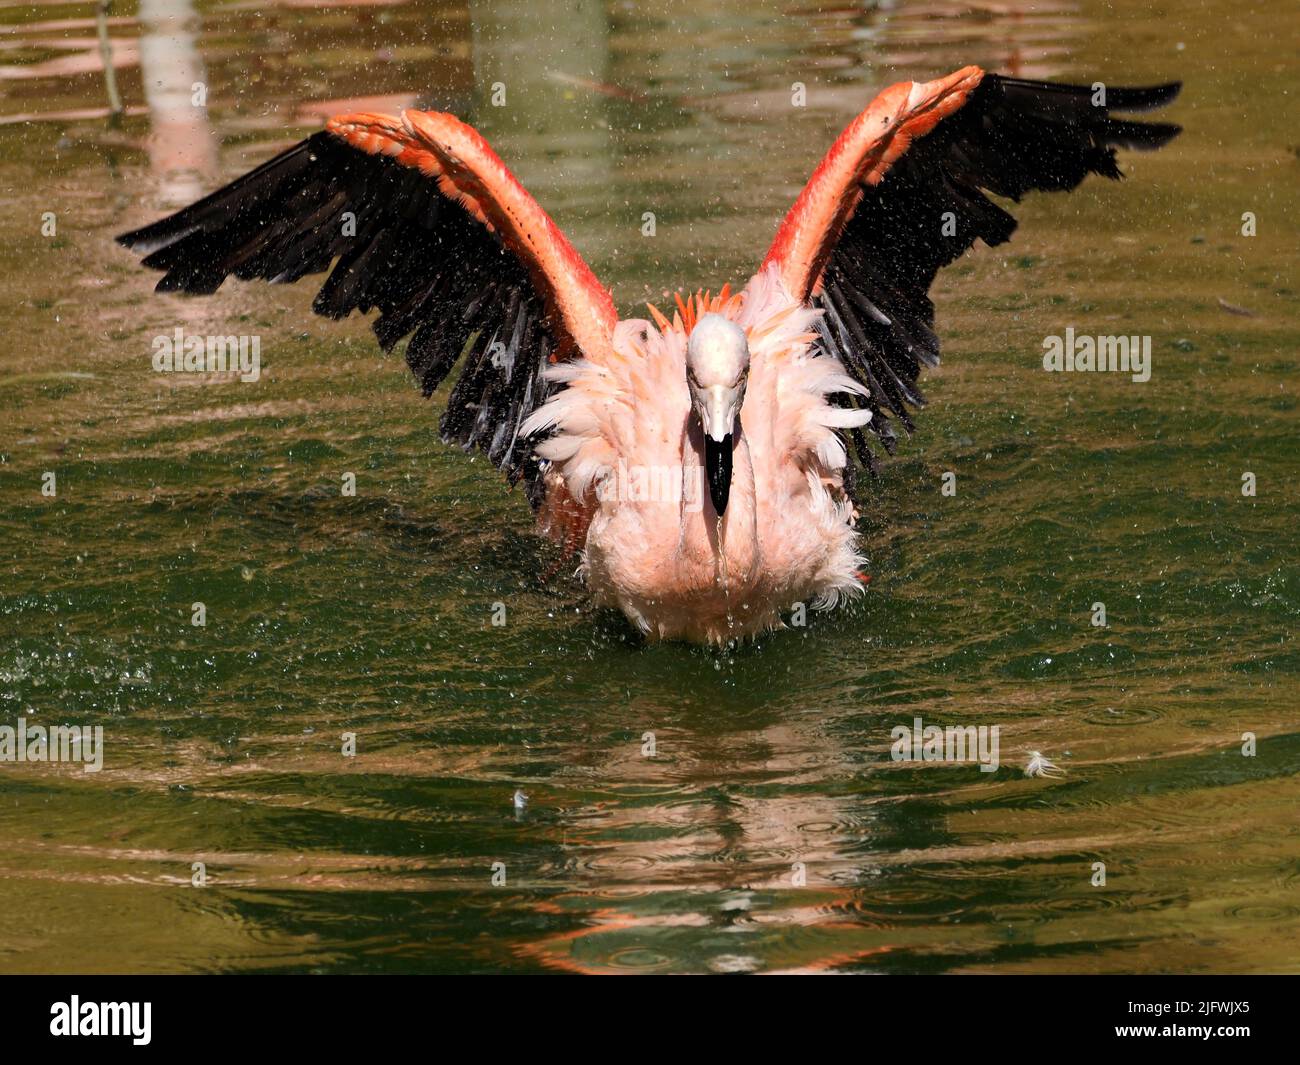 Flamingo (Phoenicopterus ruber) bathing in water with open wings and seen from front Stock Photo